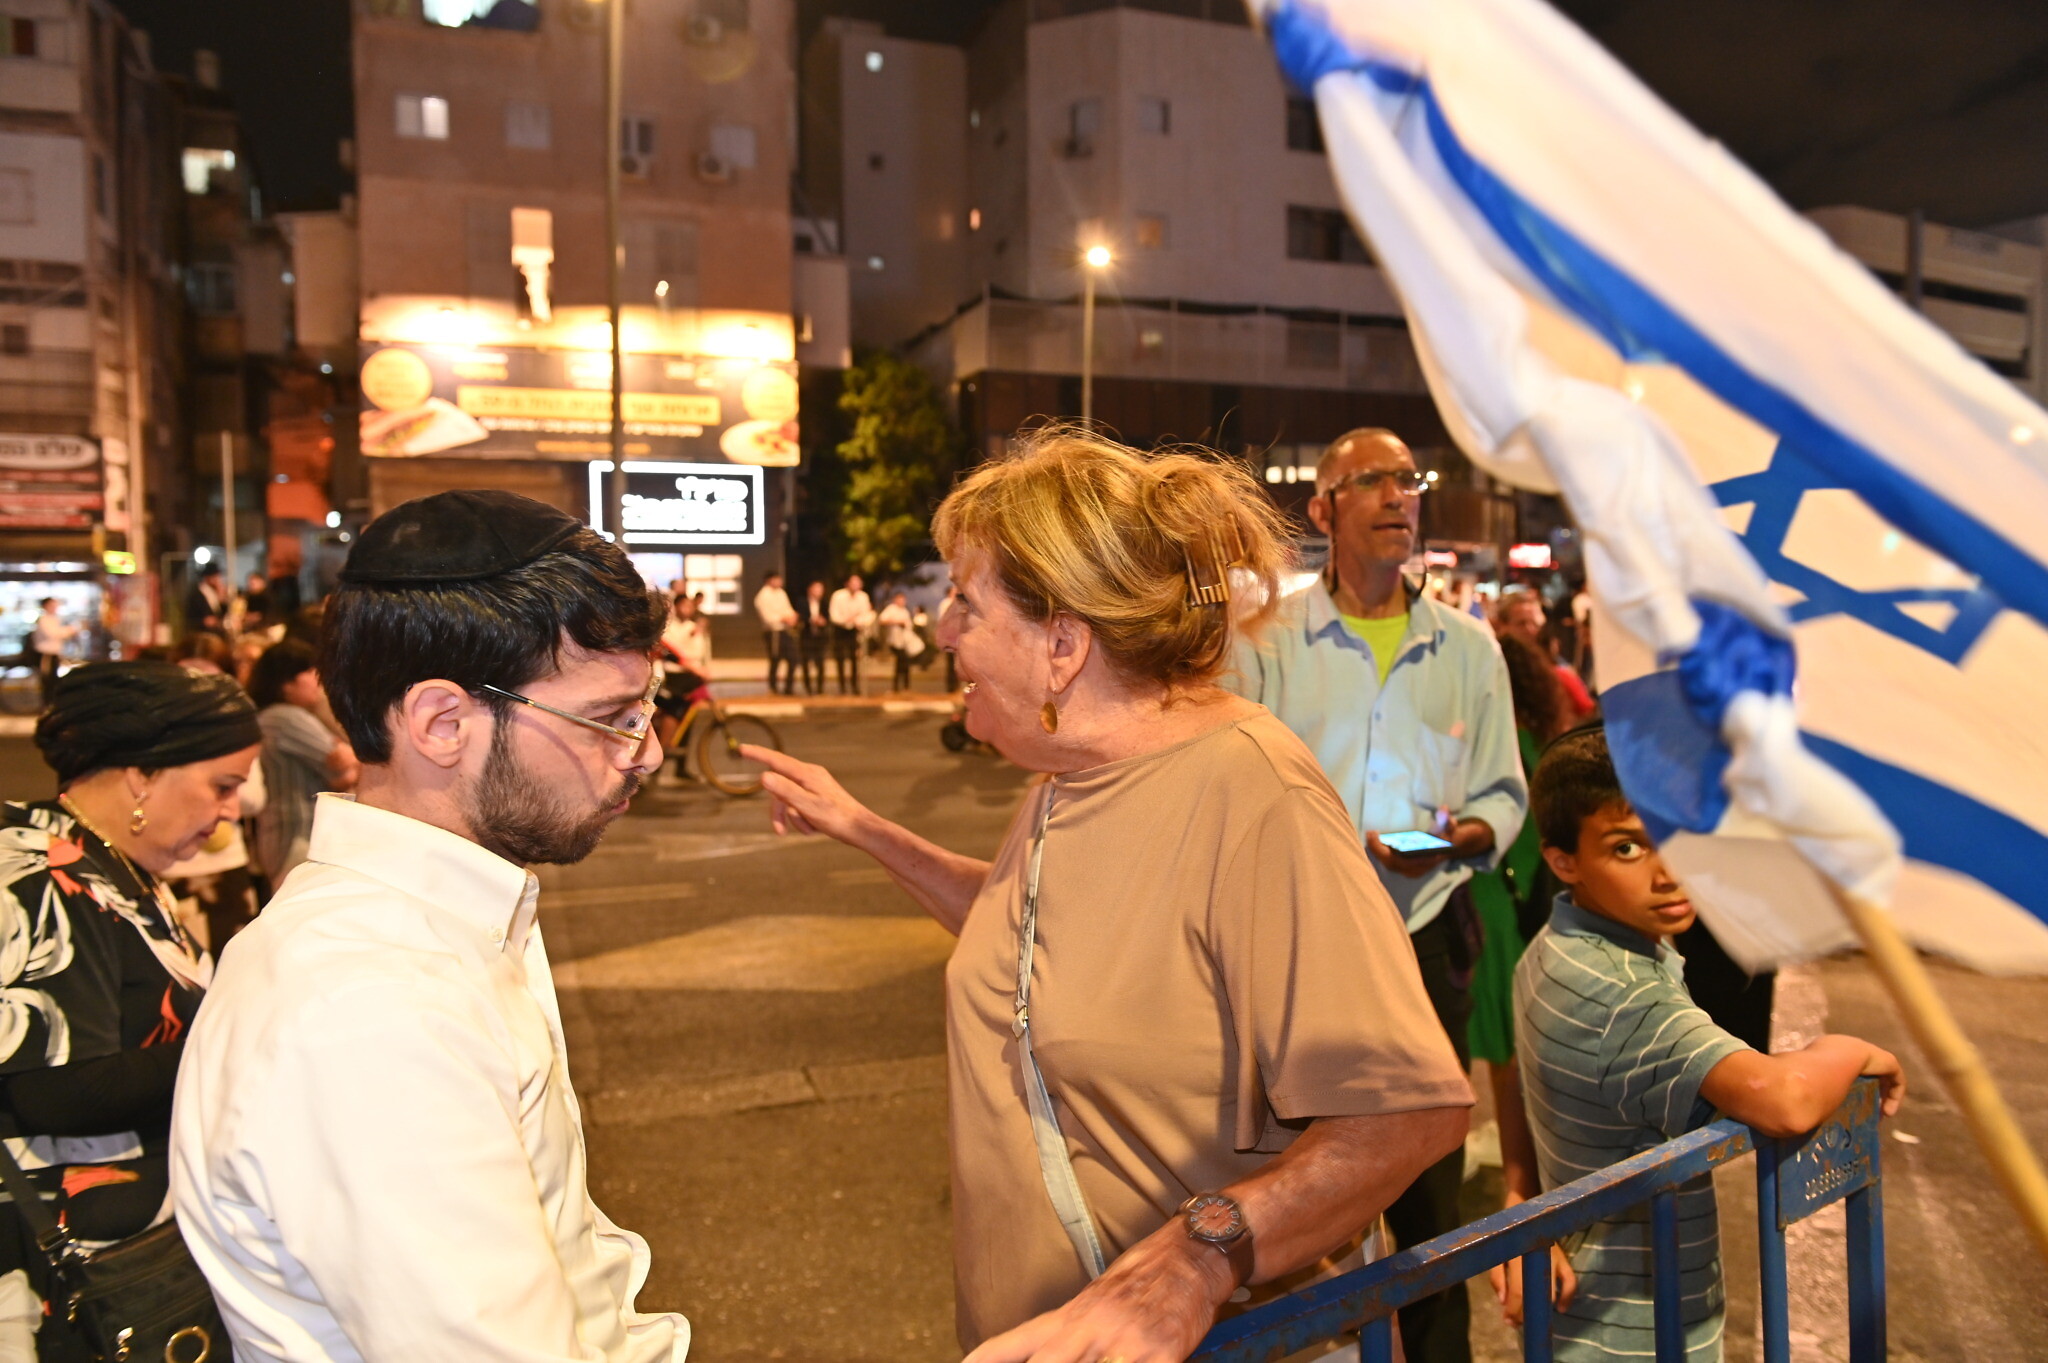 At Bnei Brak women's rights march, angry rhetoric drowns out Haredi-secular  dialogue